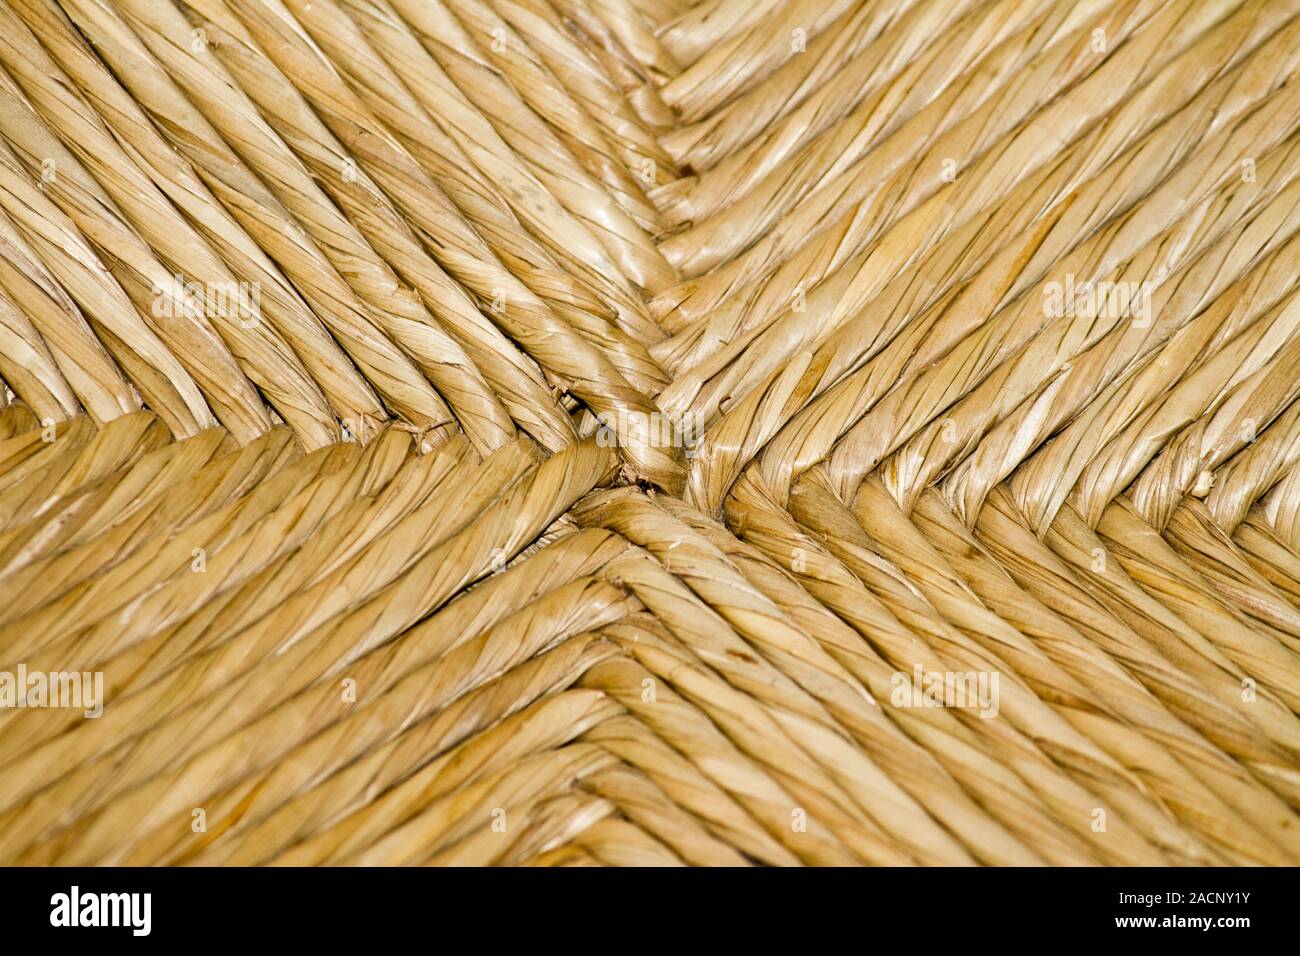 Portuguese handcrafted chair texture Stock Photo